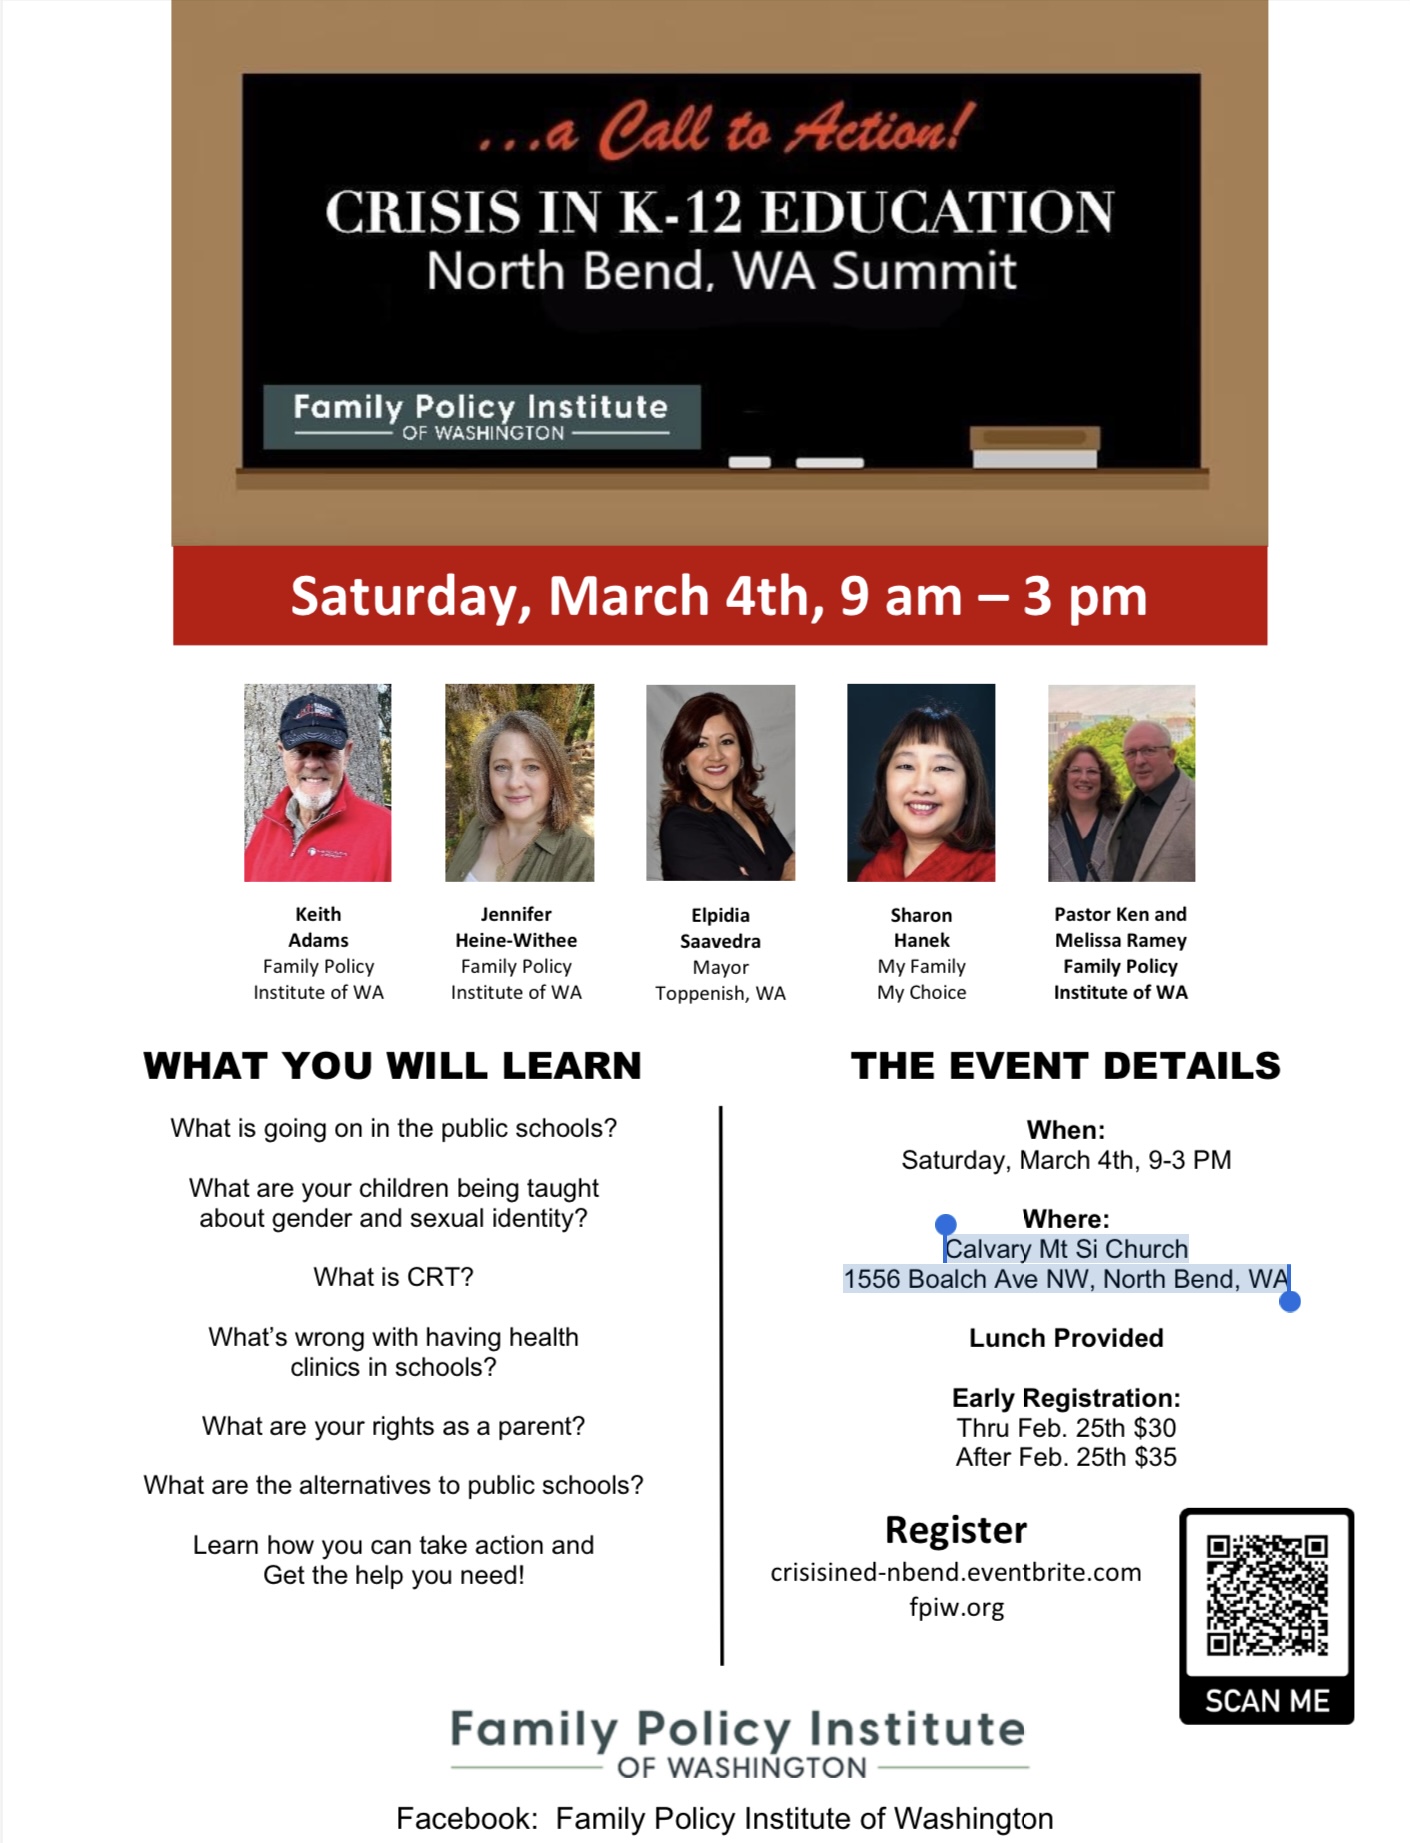 Crisis in Education Summit - North Bend